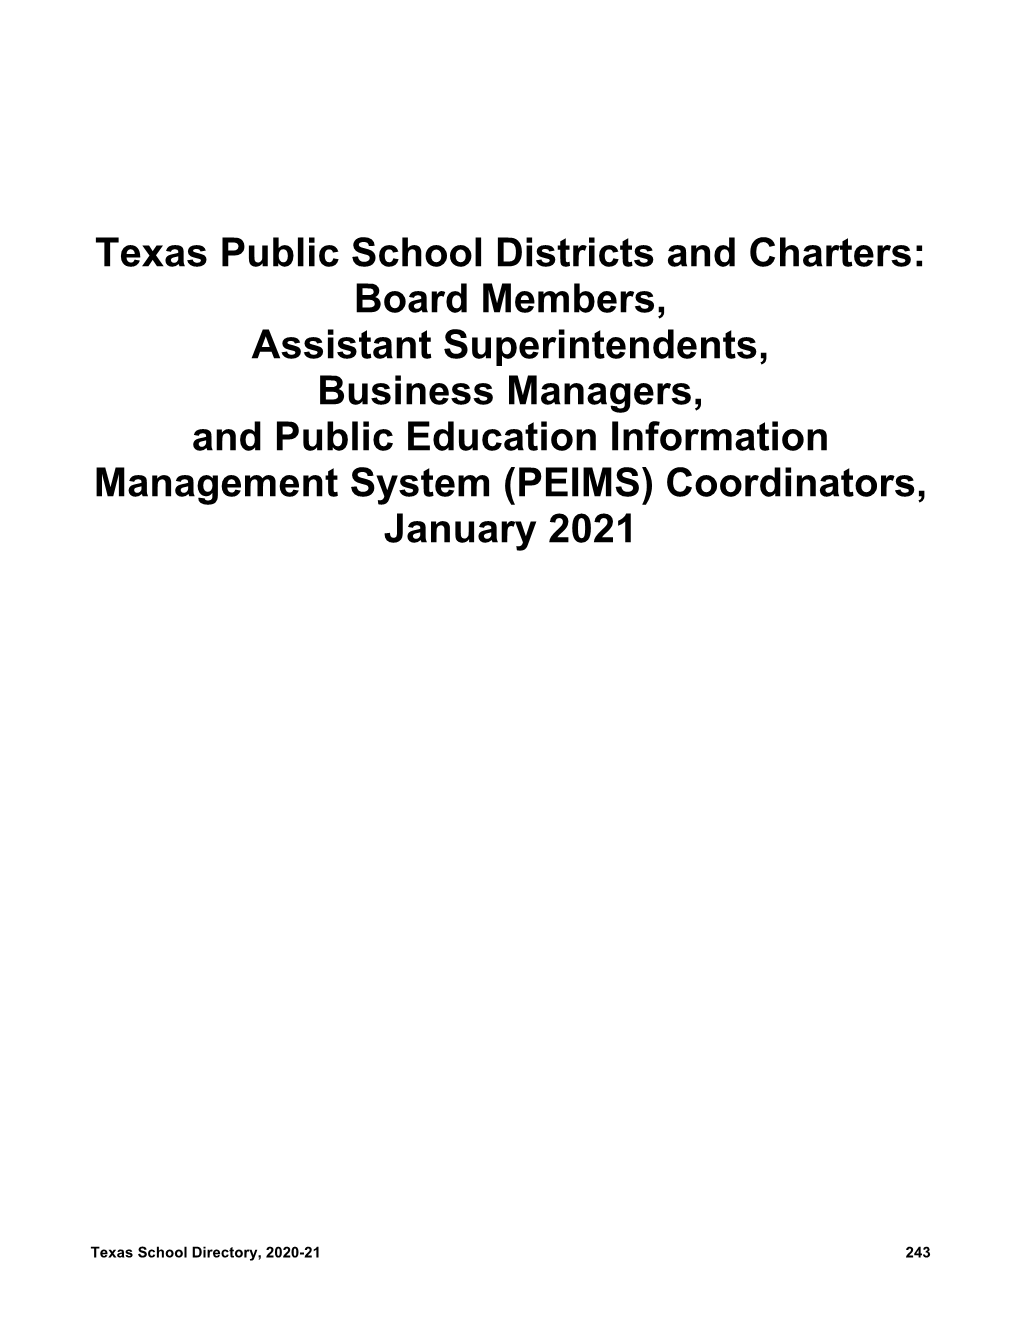 Texas Public School Districts and Charters: Board Members, Assistant